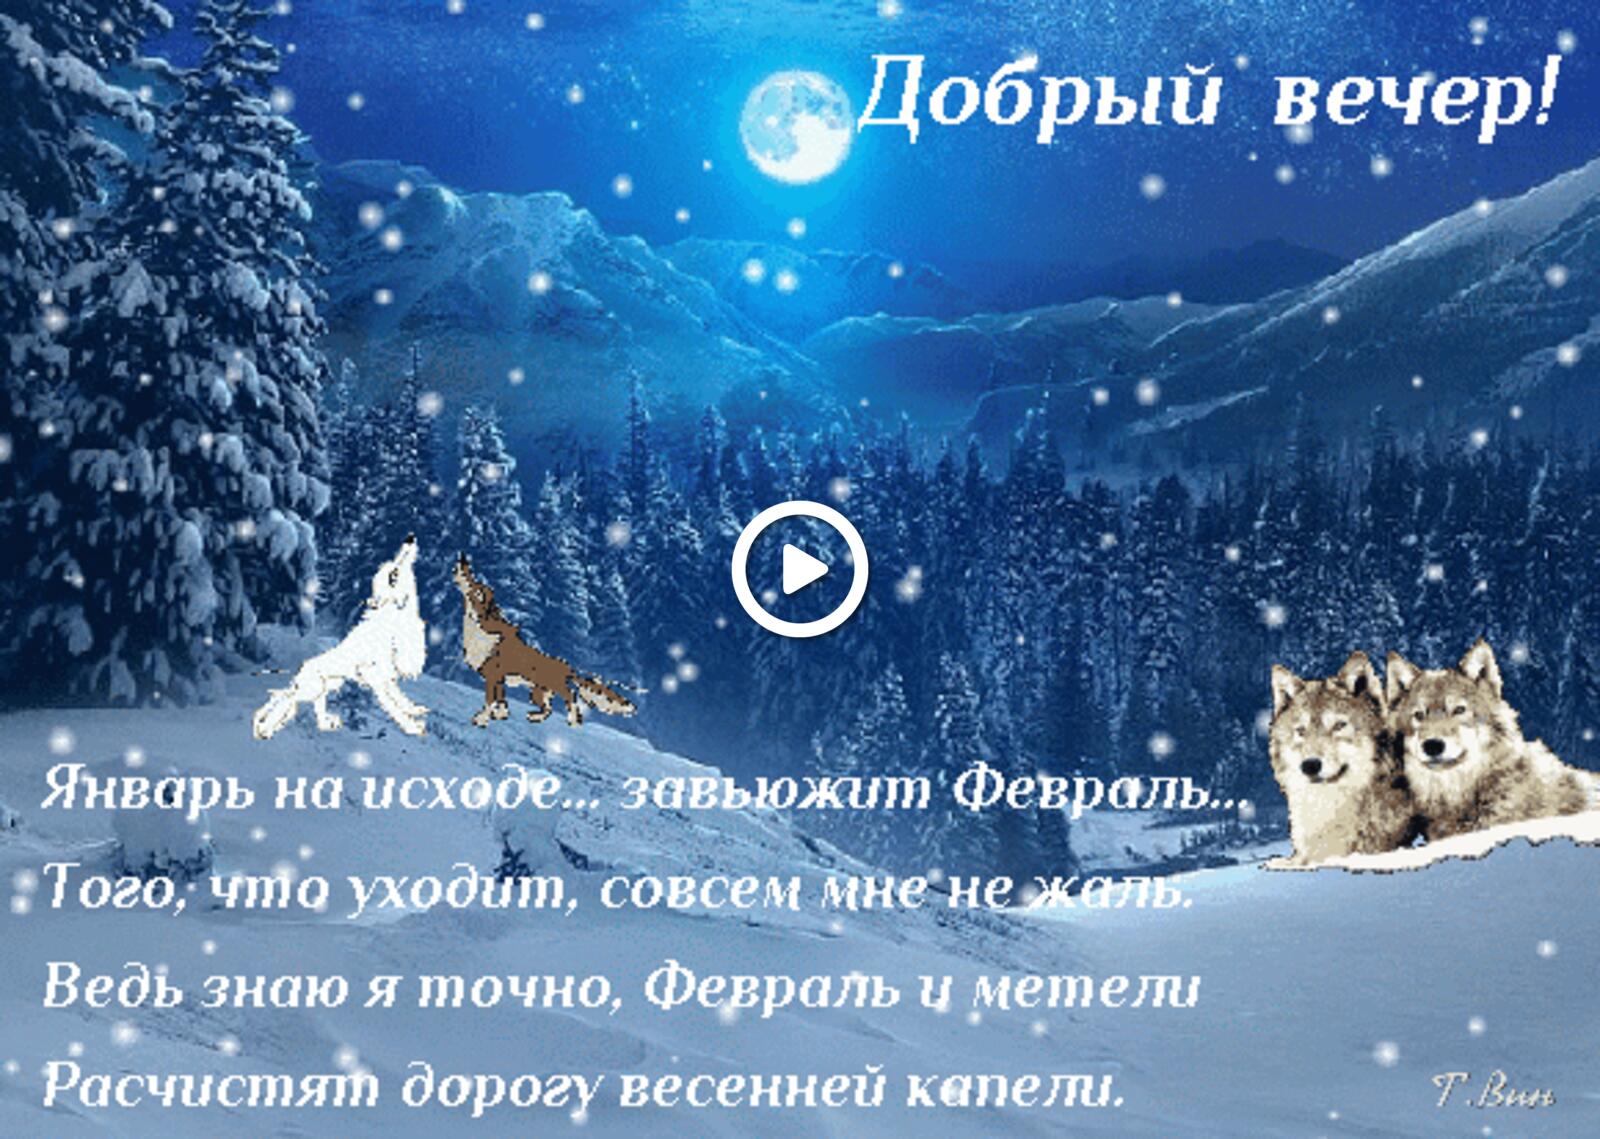 A postcard on the subject of good evening good evening winter wolves for free